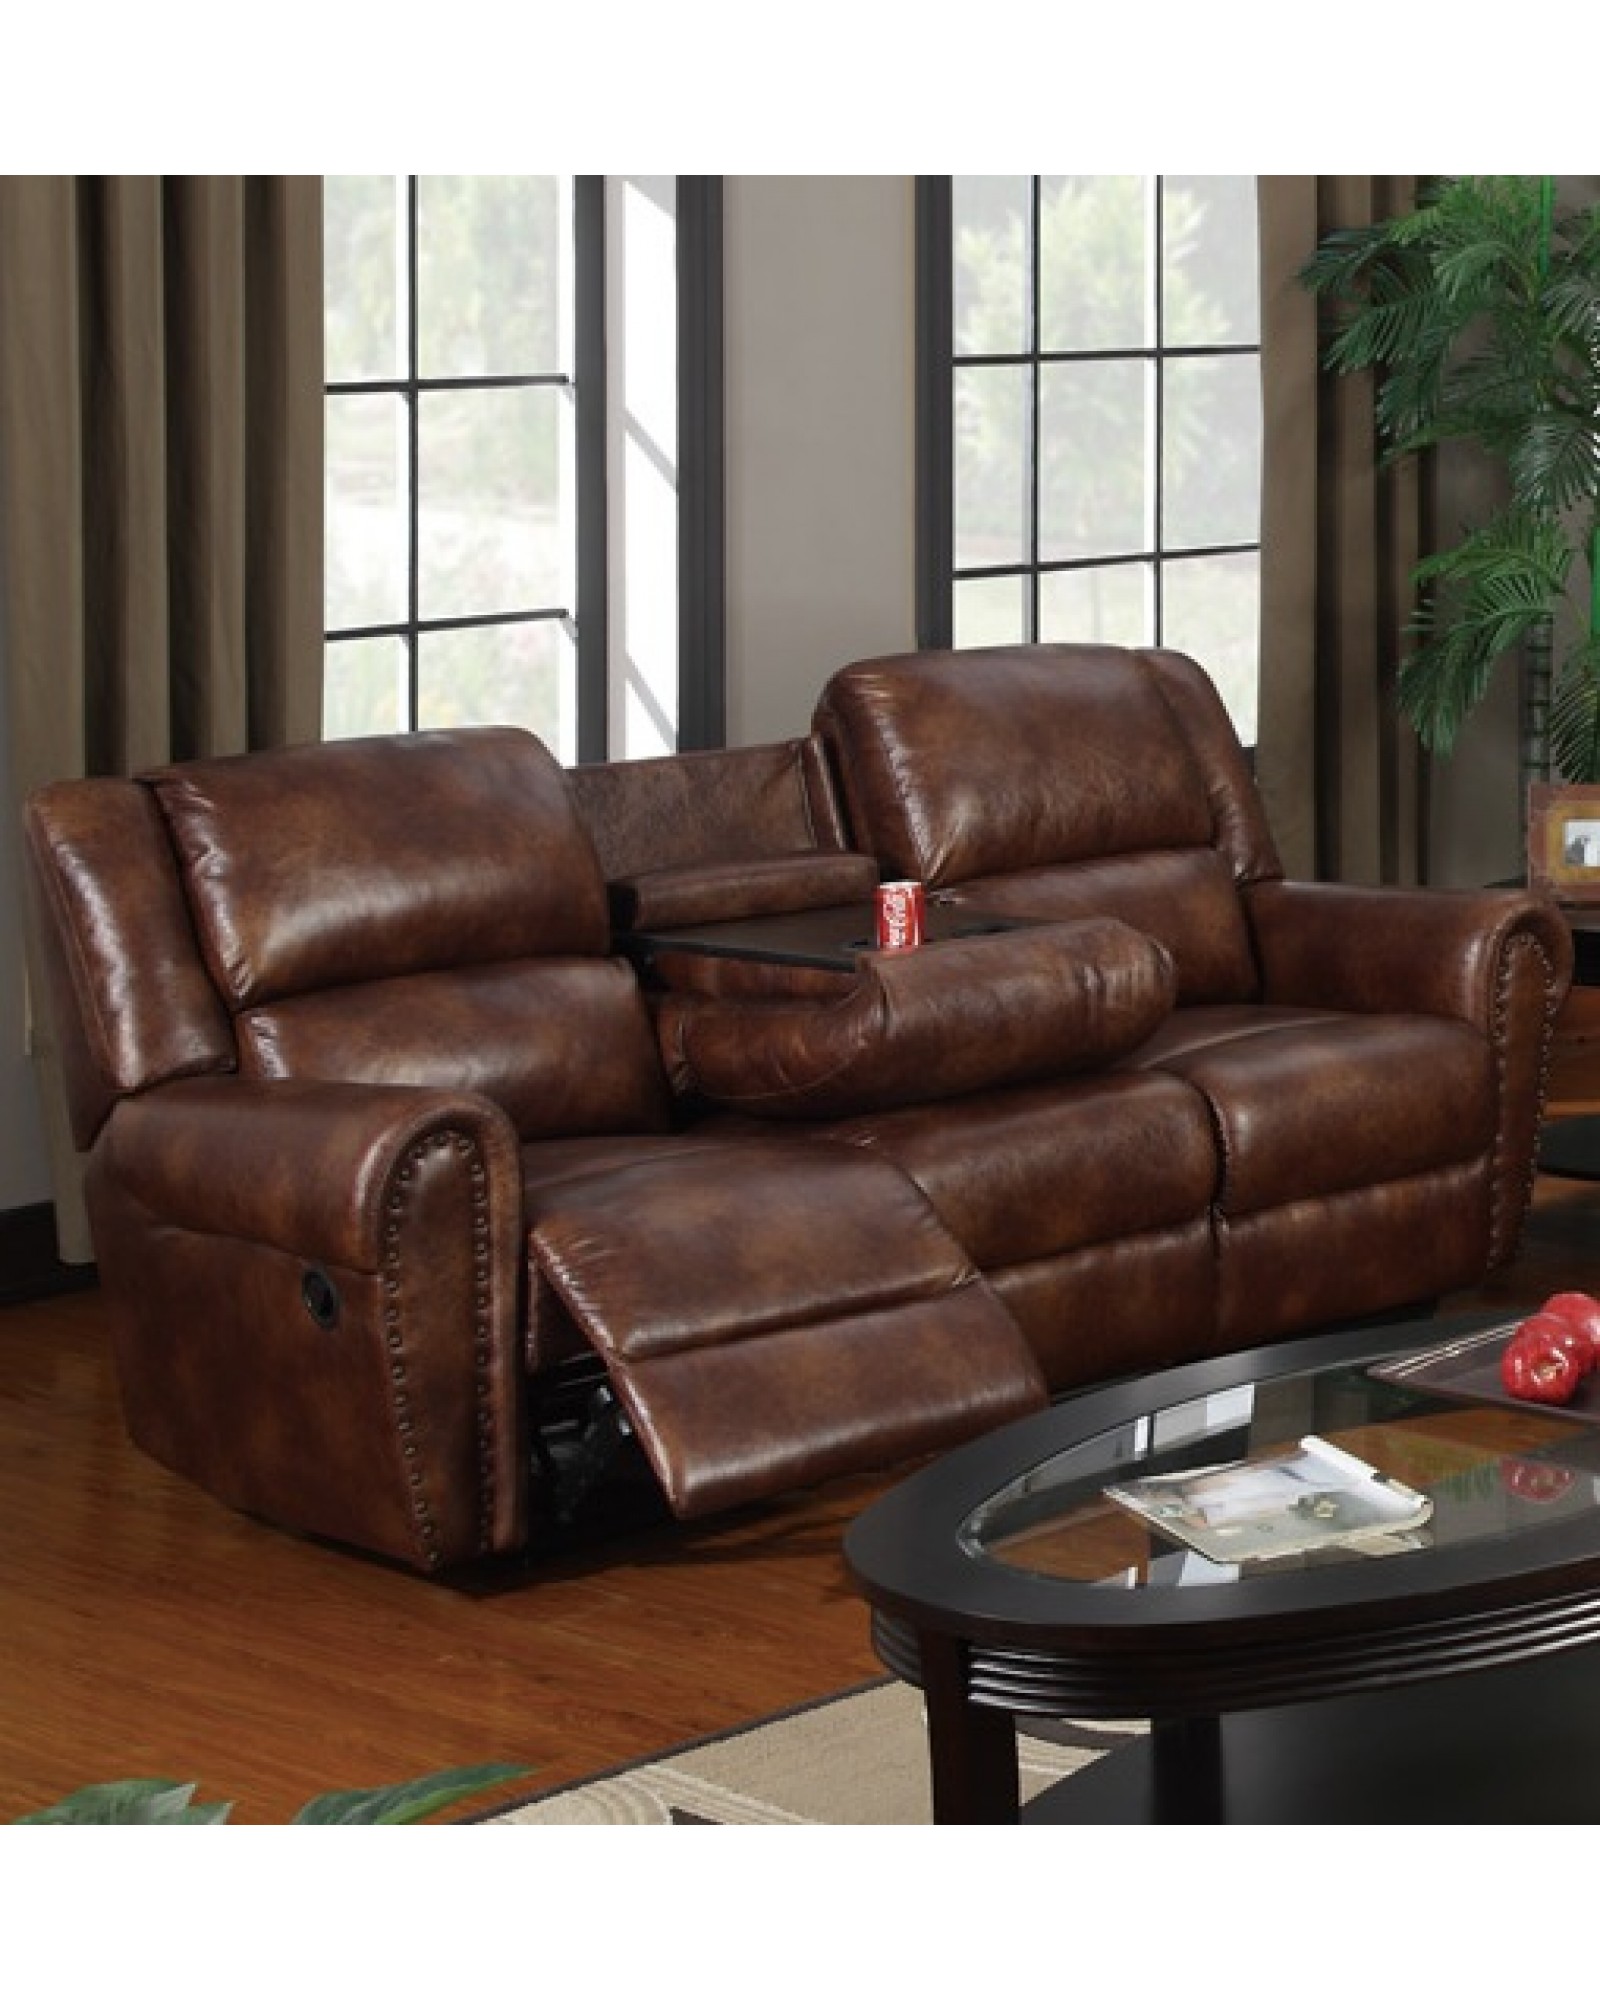 Padded Leatherette Motion Sofa, Loveseat and Recliner, Brown